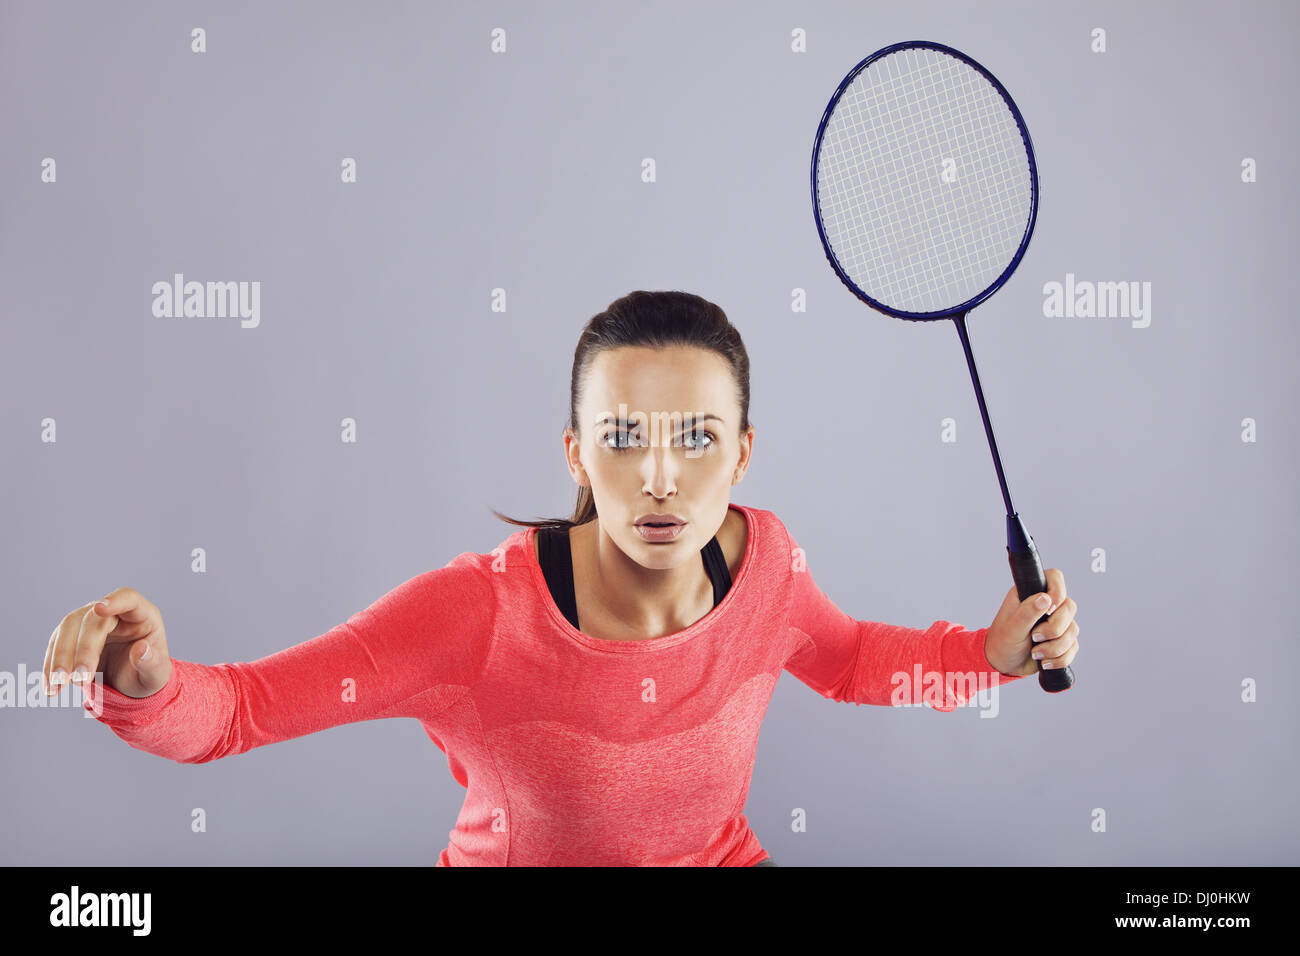 Portrait of young sports woman playing badminton against grey background. Fit athlete playing badminton. Stock Photo